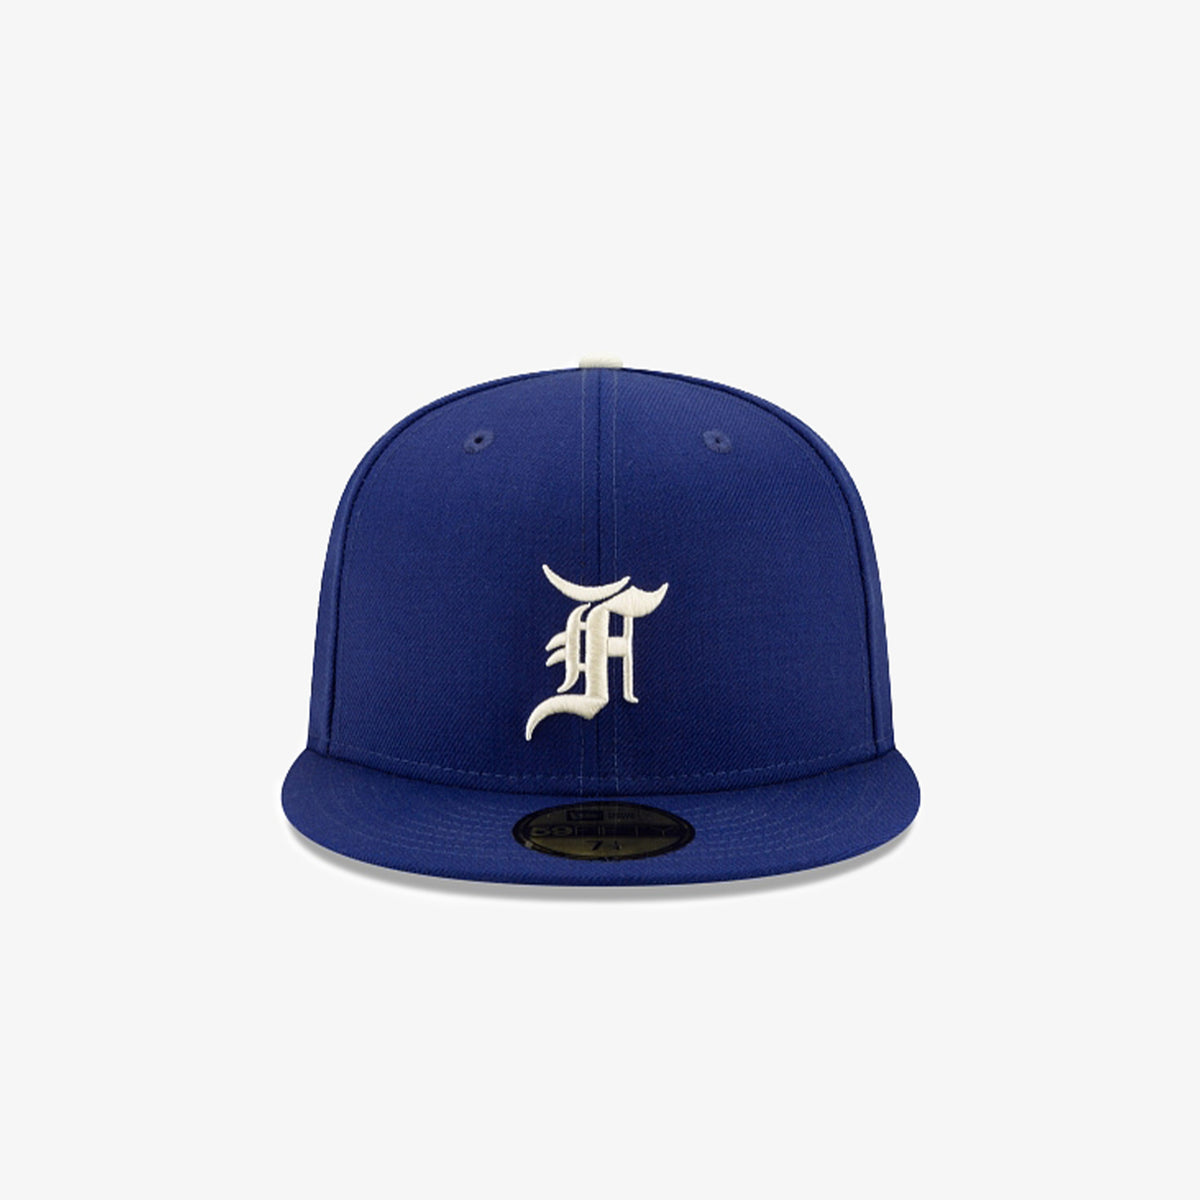 Fear of God. Dodgers Colorway. 2020 WS Patch. : r/neweracaps